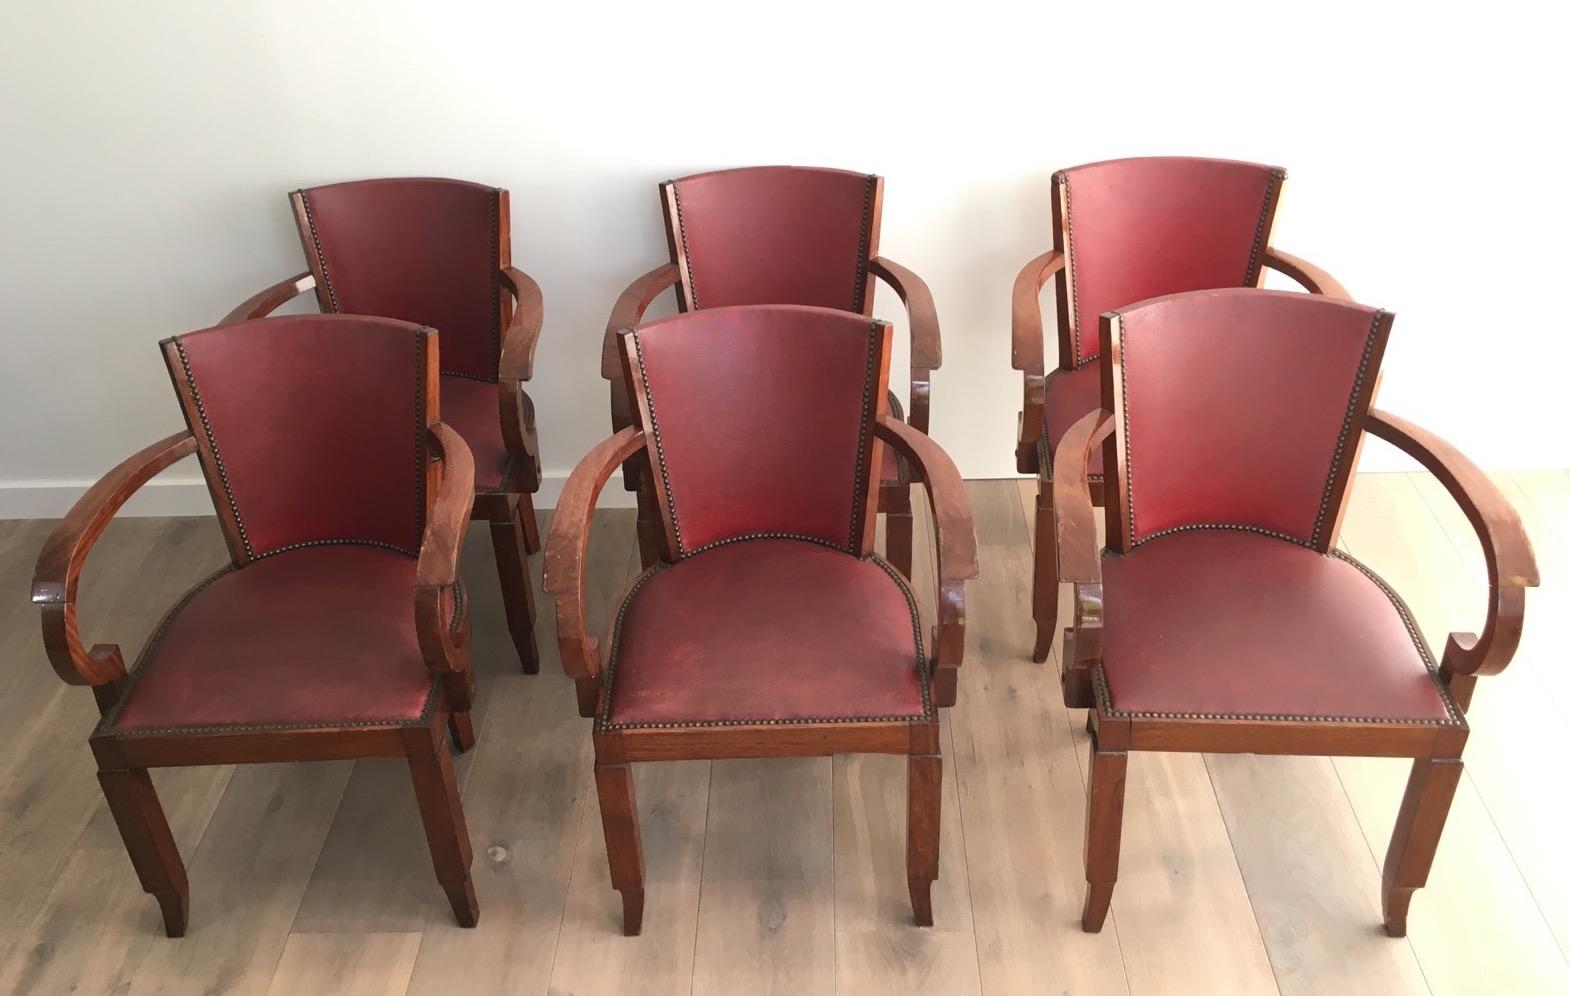 Rare Set of 8 Mahogany and Faux-Leather Art Deco Armchairs, French, circa 1930 For Sale 13